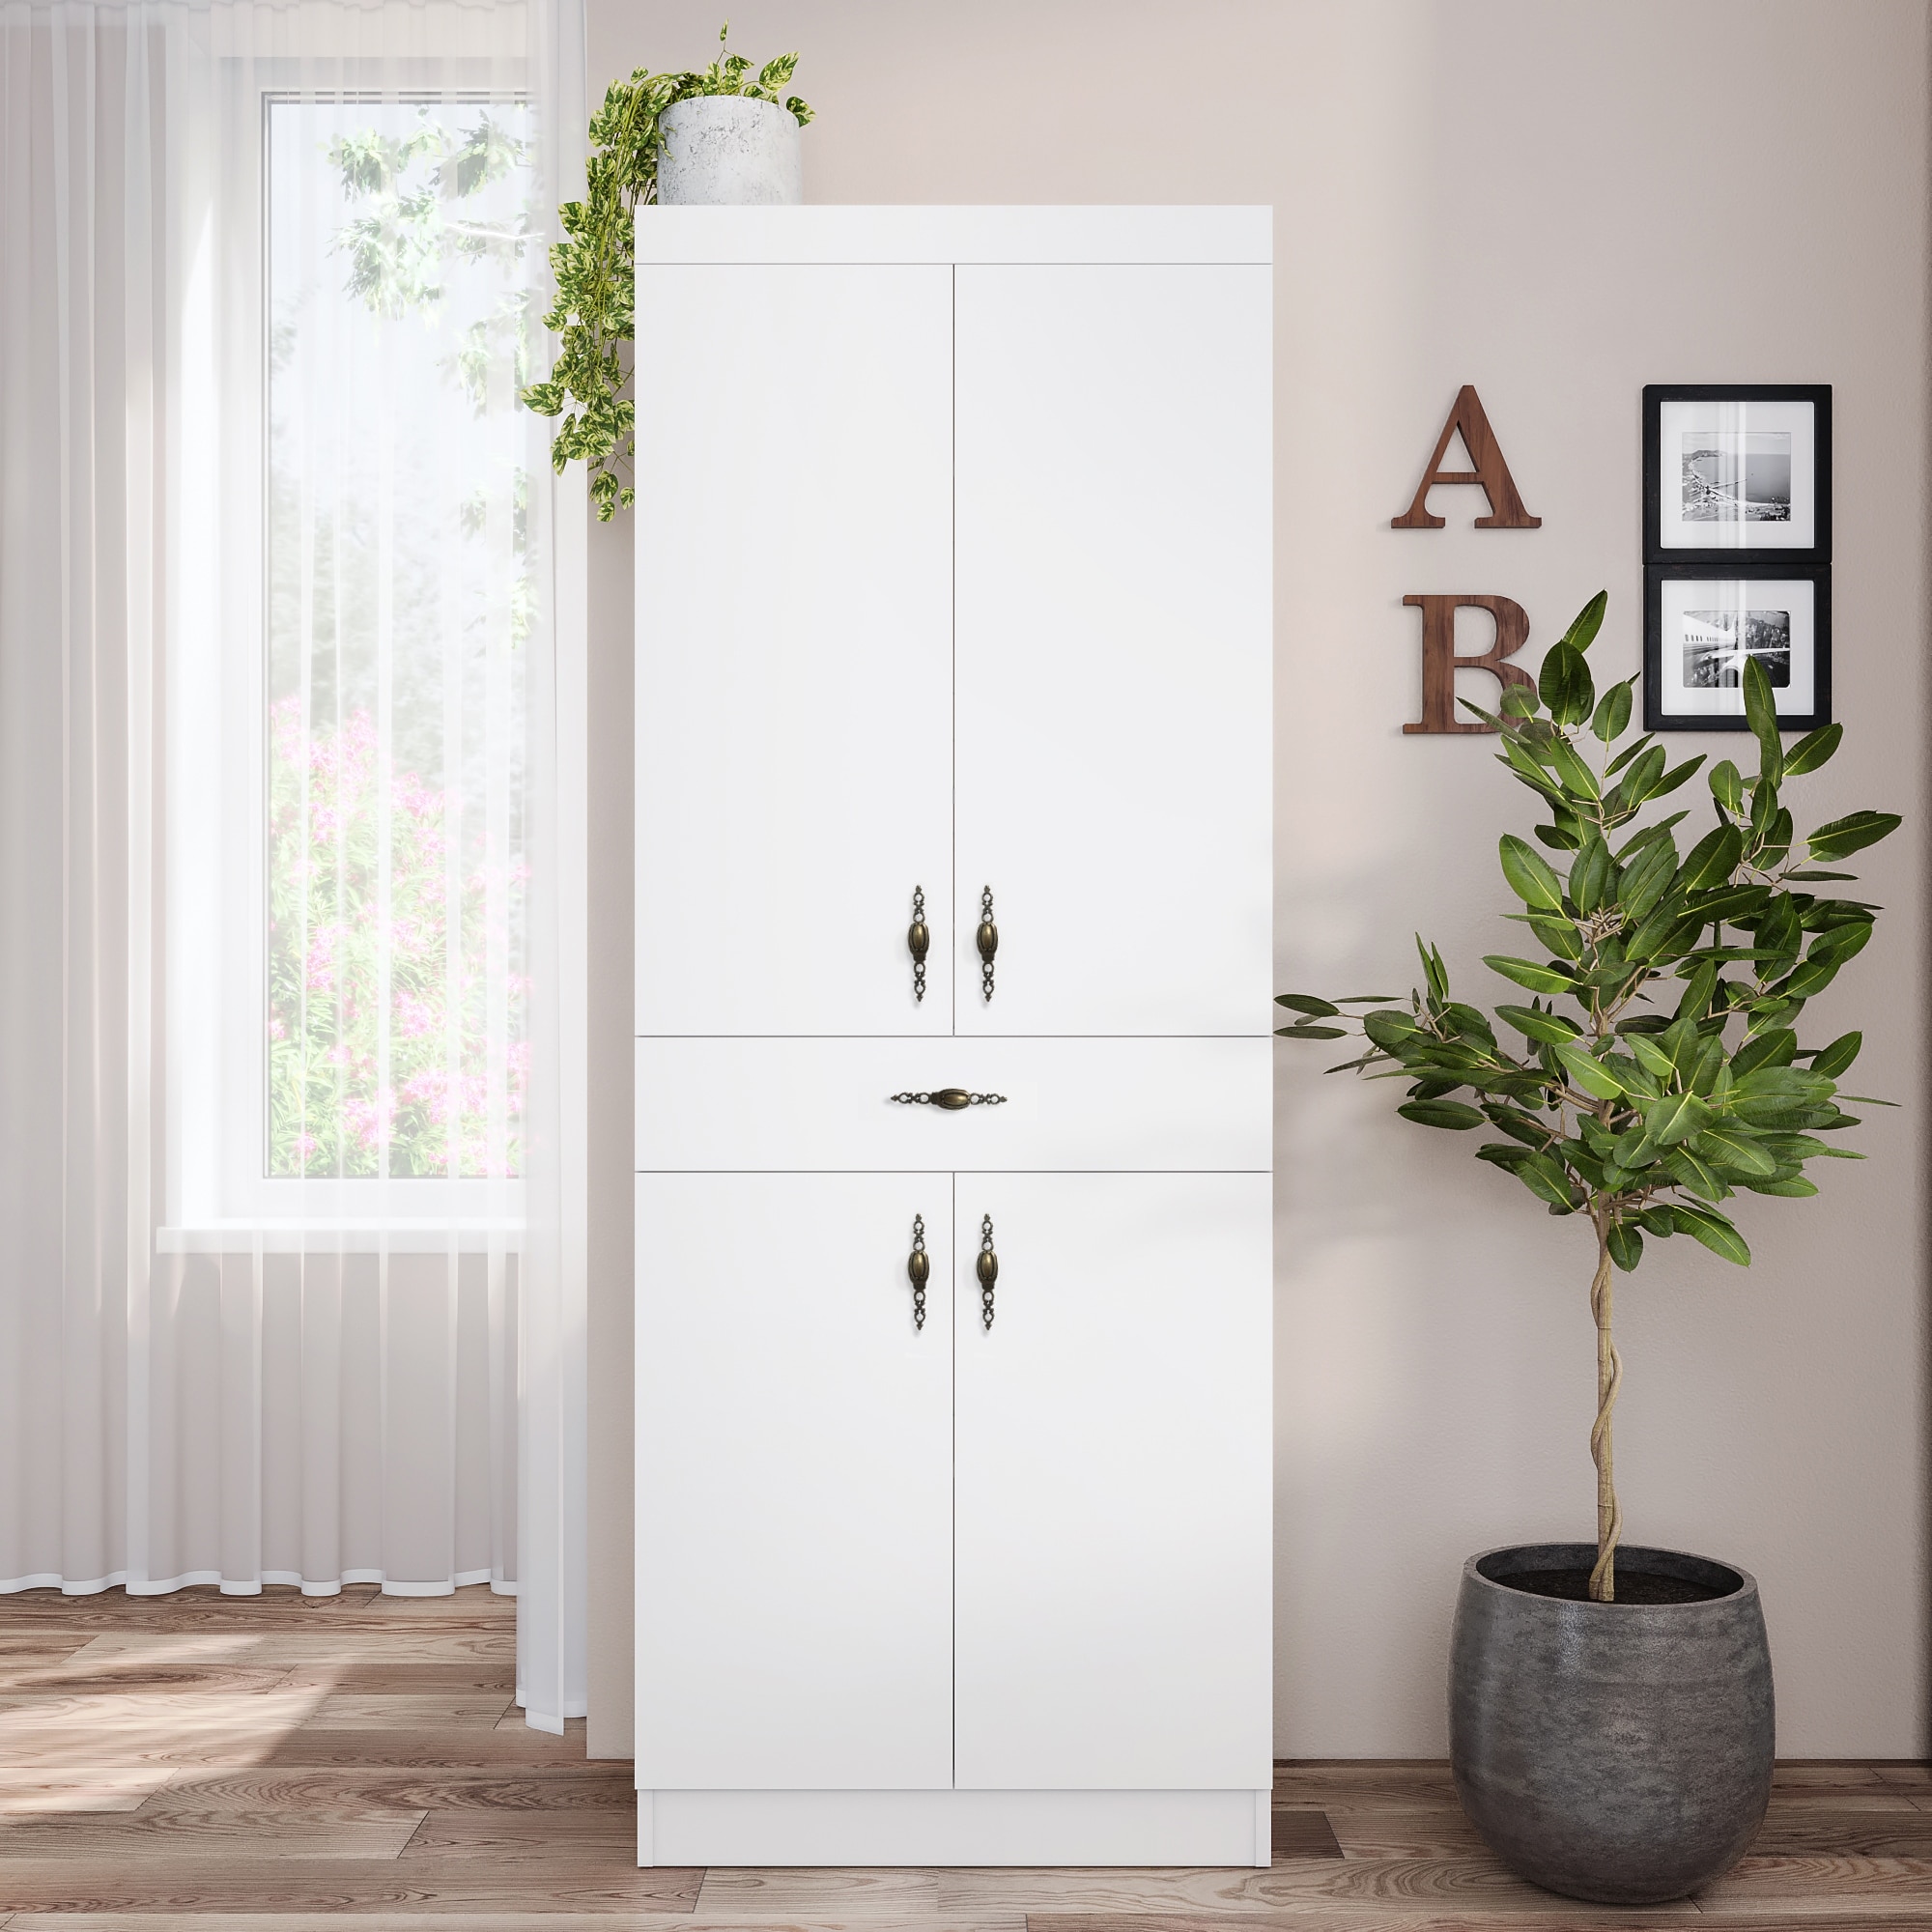 https://ak1.ostkcdn.com/images/products/is/images/direct/a86979c320f6d735812bab4f4f3bcfb6e07401b1/Living-Skog-Monti-Food-Pantry-Storage-Kitchen-Cabinet-with-Adjustable-Shelves-and-Drawer.jpg